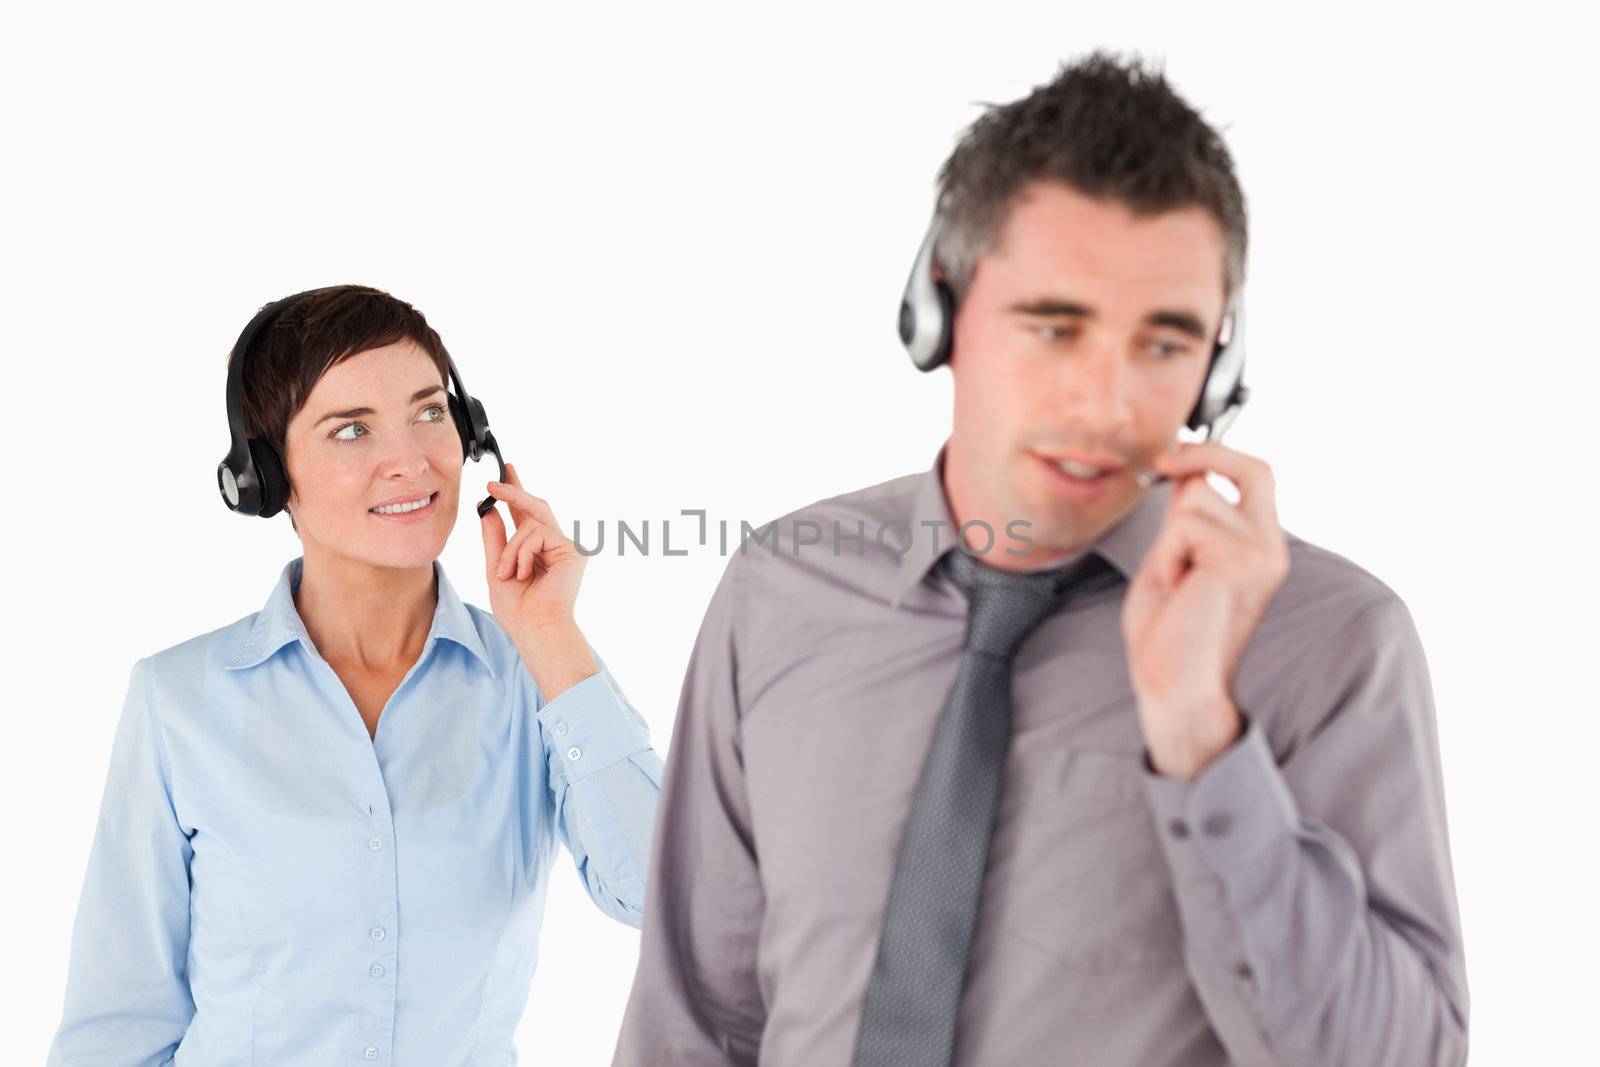 Business people using headsets by Wavebreakmedia